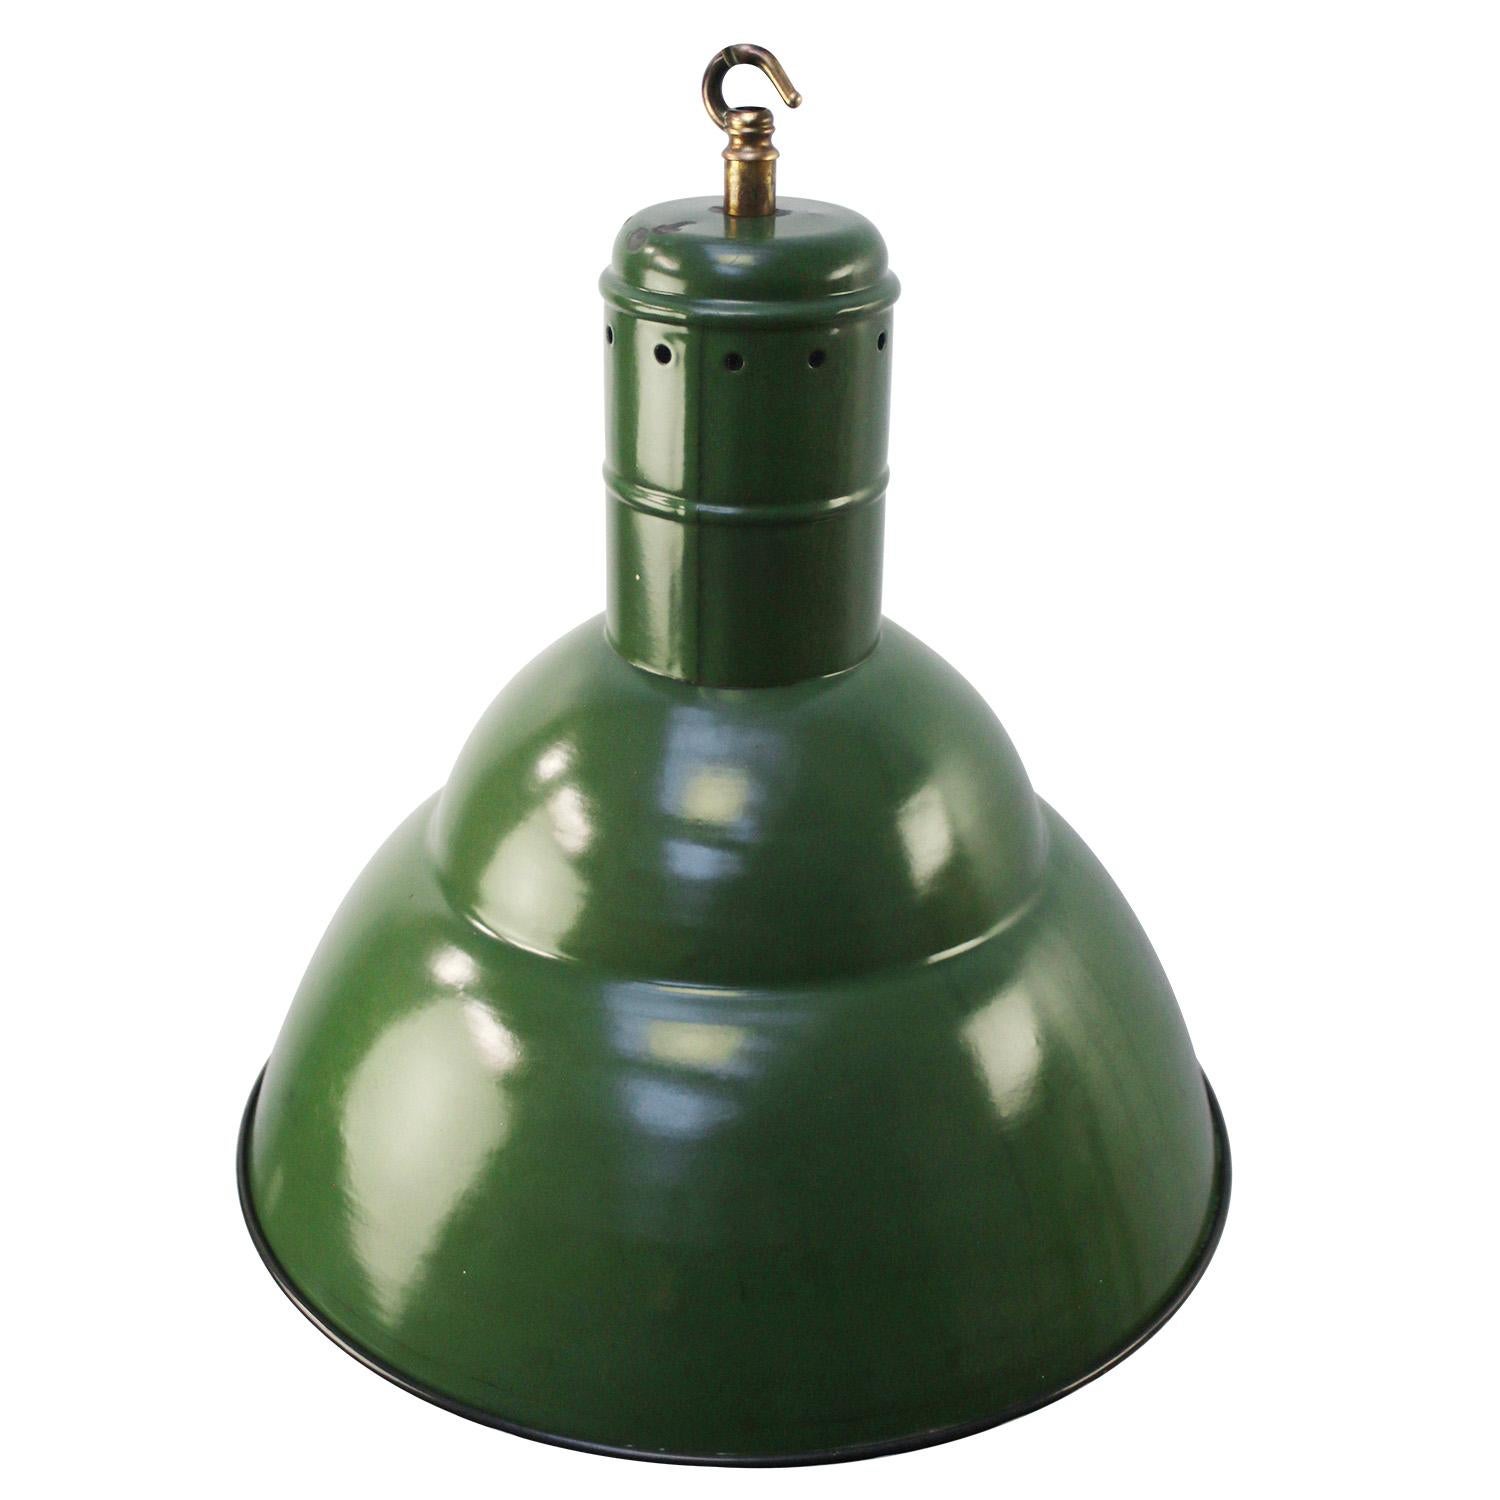 Rare French Enamel Factory Pendant Light
Thick quality Enamel.
Used in warehouses and factories. 

Weight: 2.90 kg / 6.4 lb

Priced per individual item. All lamps have been made suitable by international standards for incandescent light bulbs,